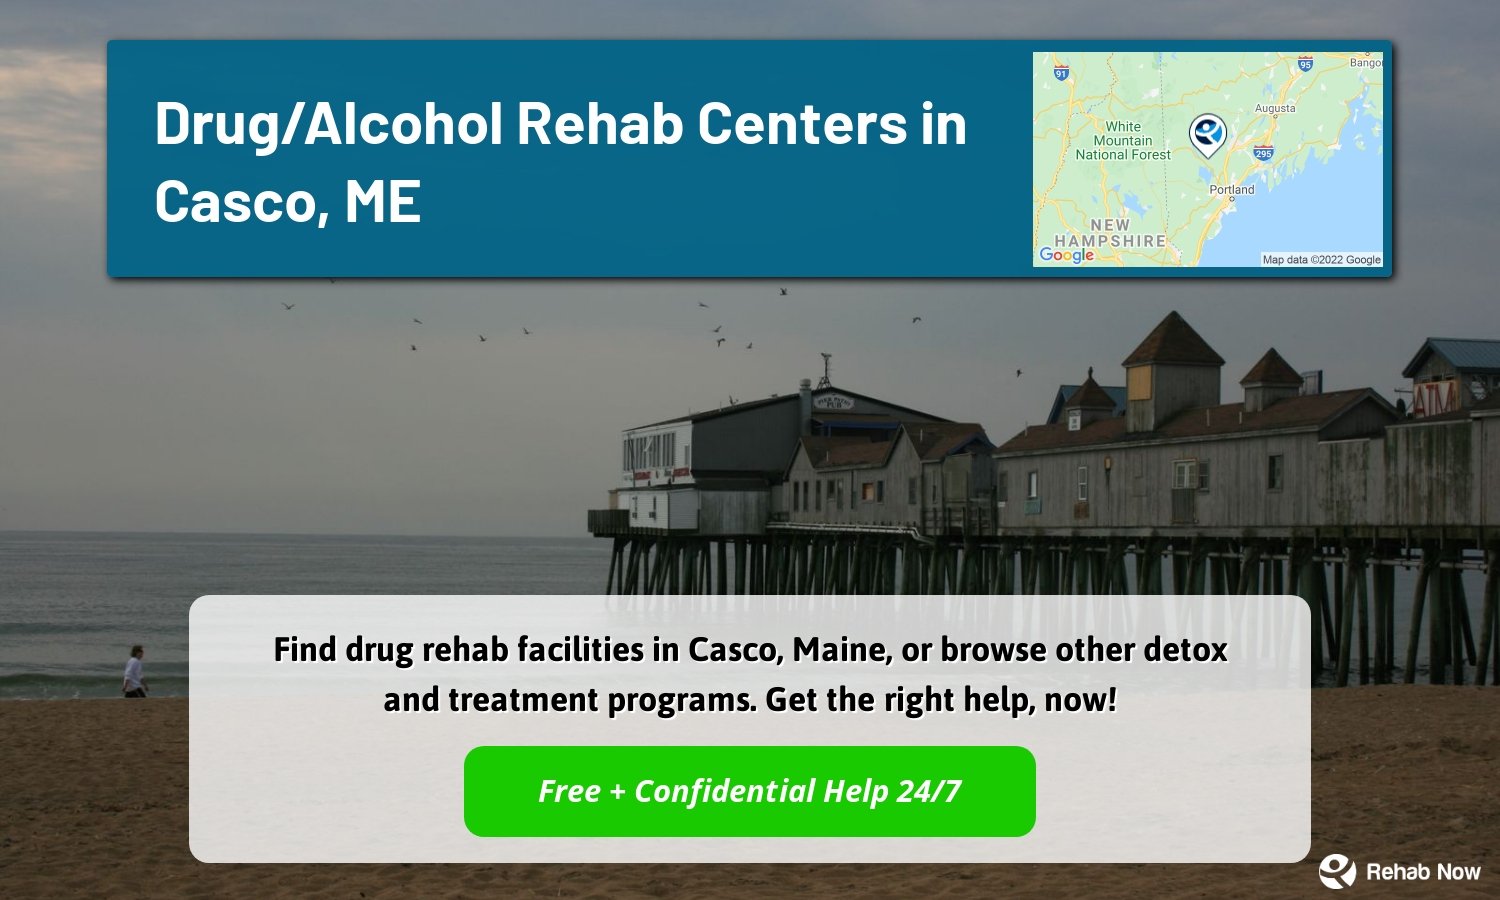 Find drug rehab facilities in Casco, Maine, or browse other detox and treatment programs. Get the right help, now!